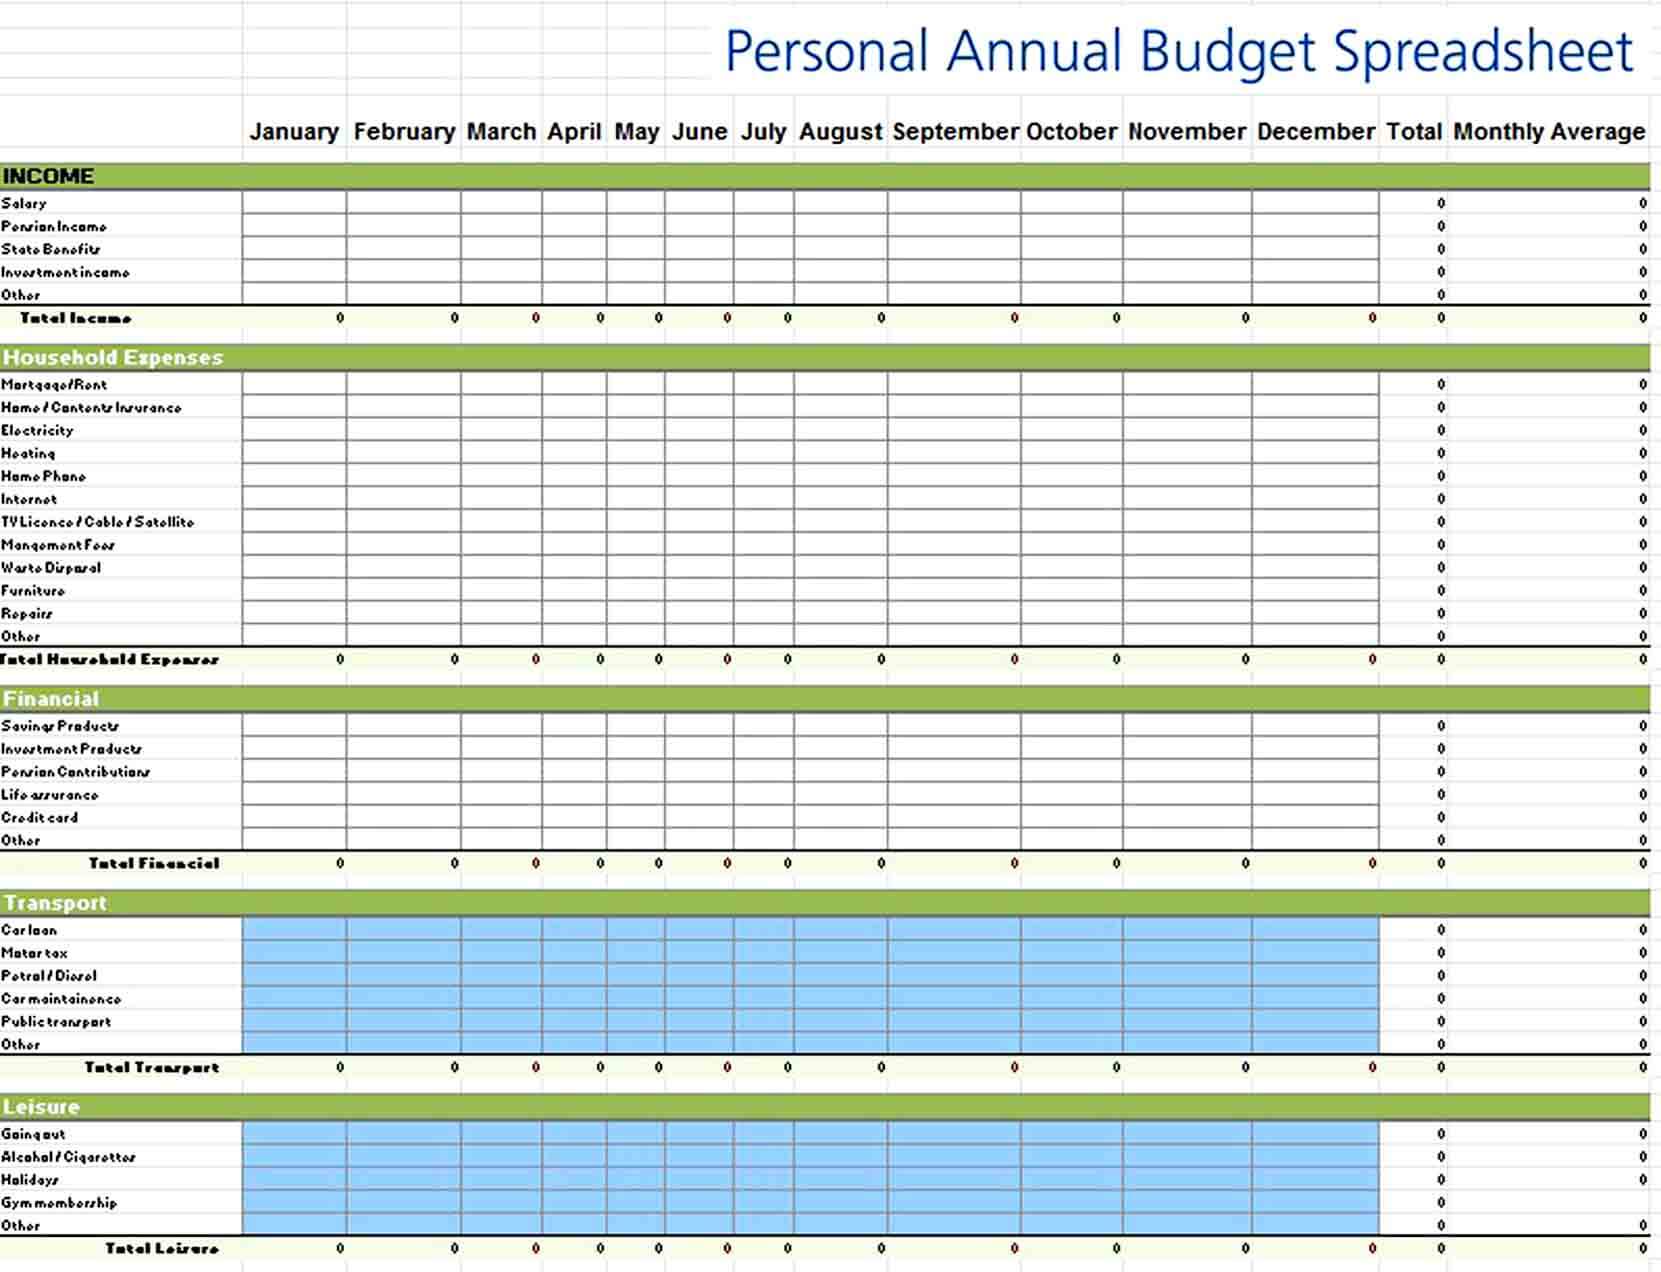 Personal Annual Budget Spreadsheet